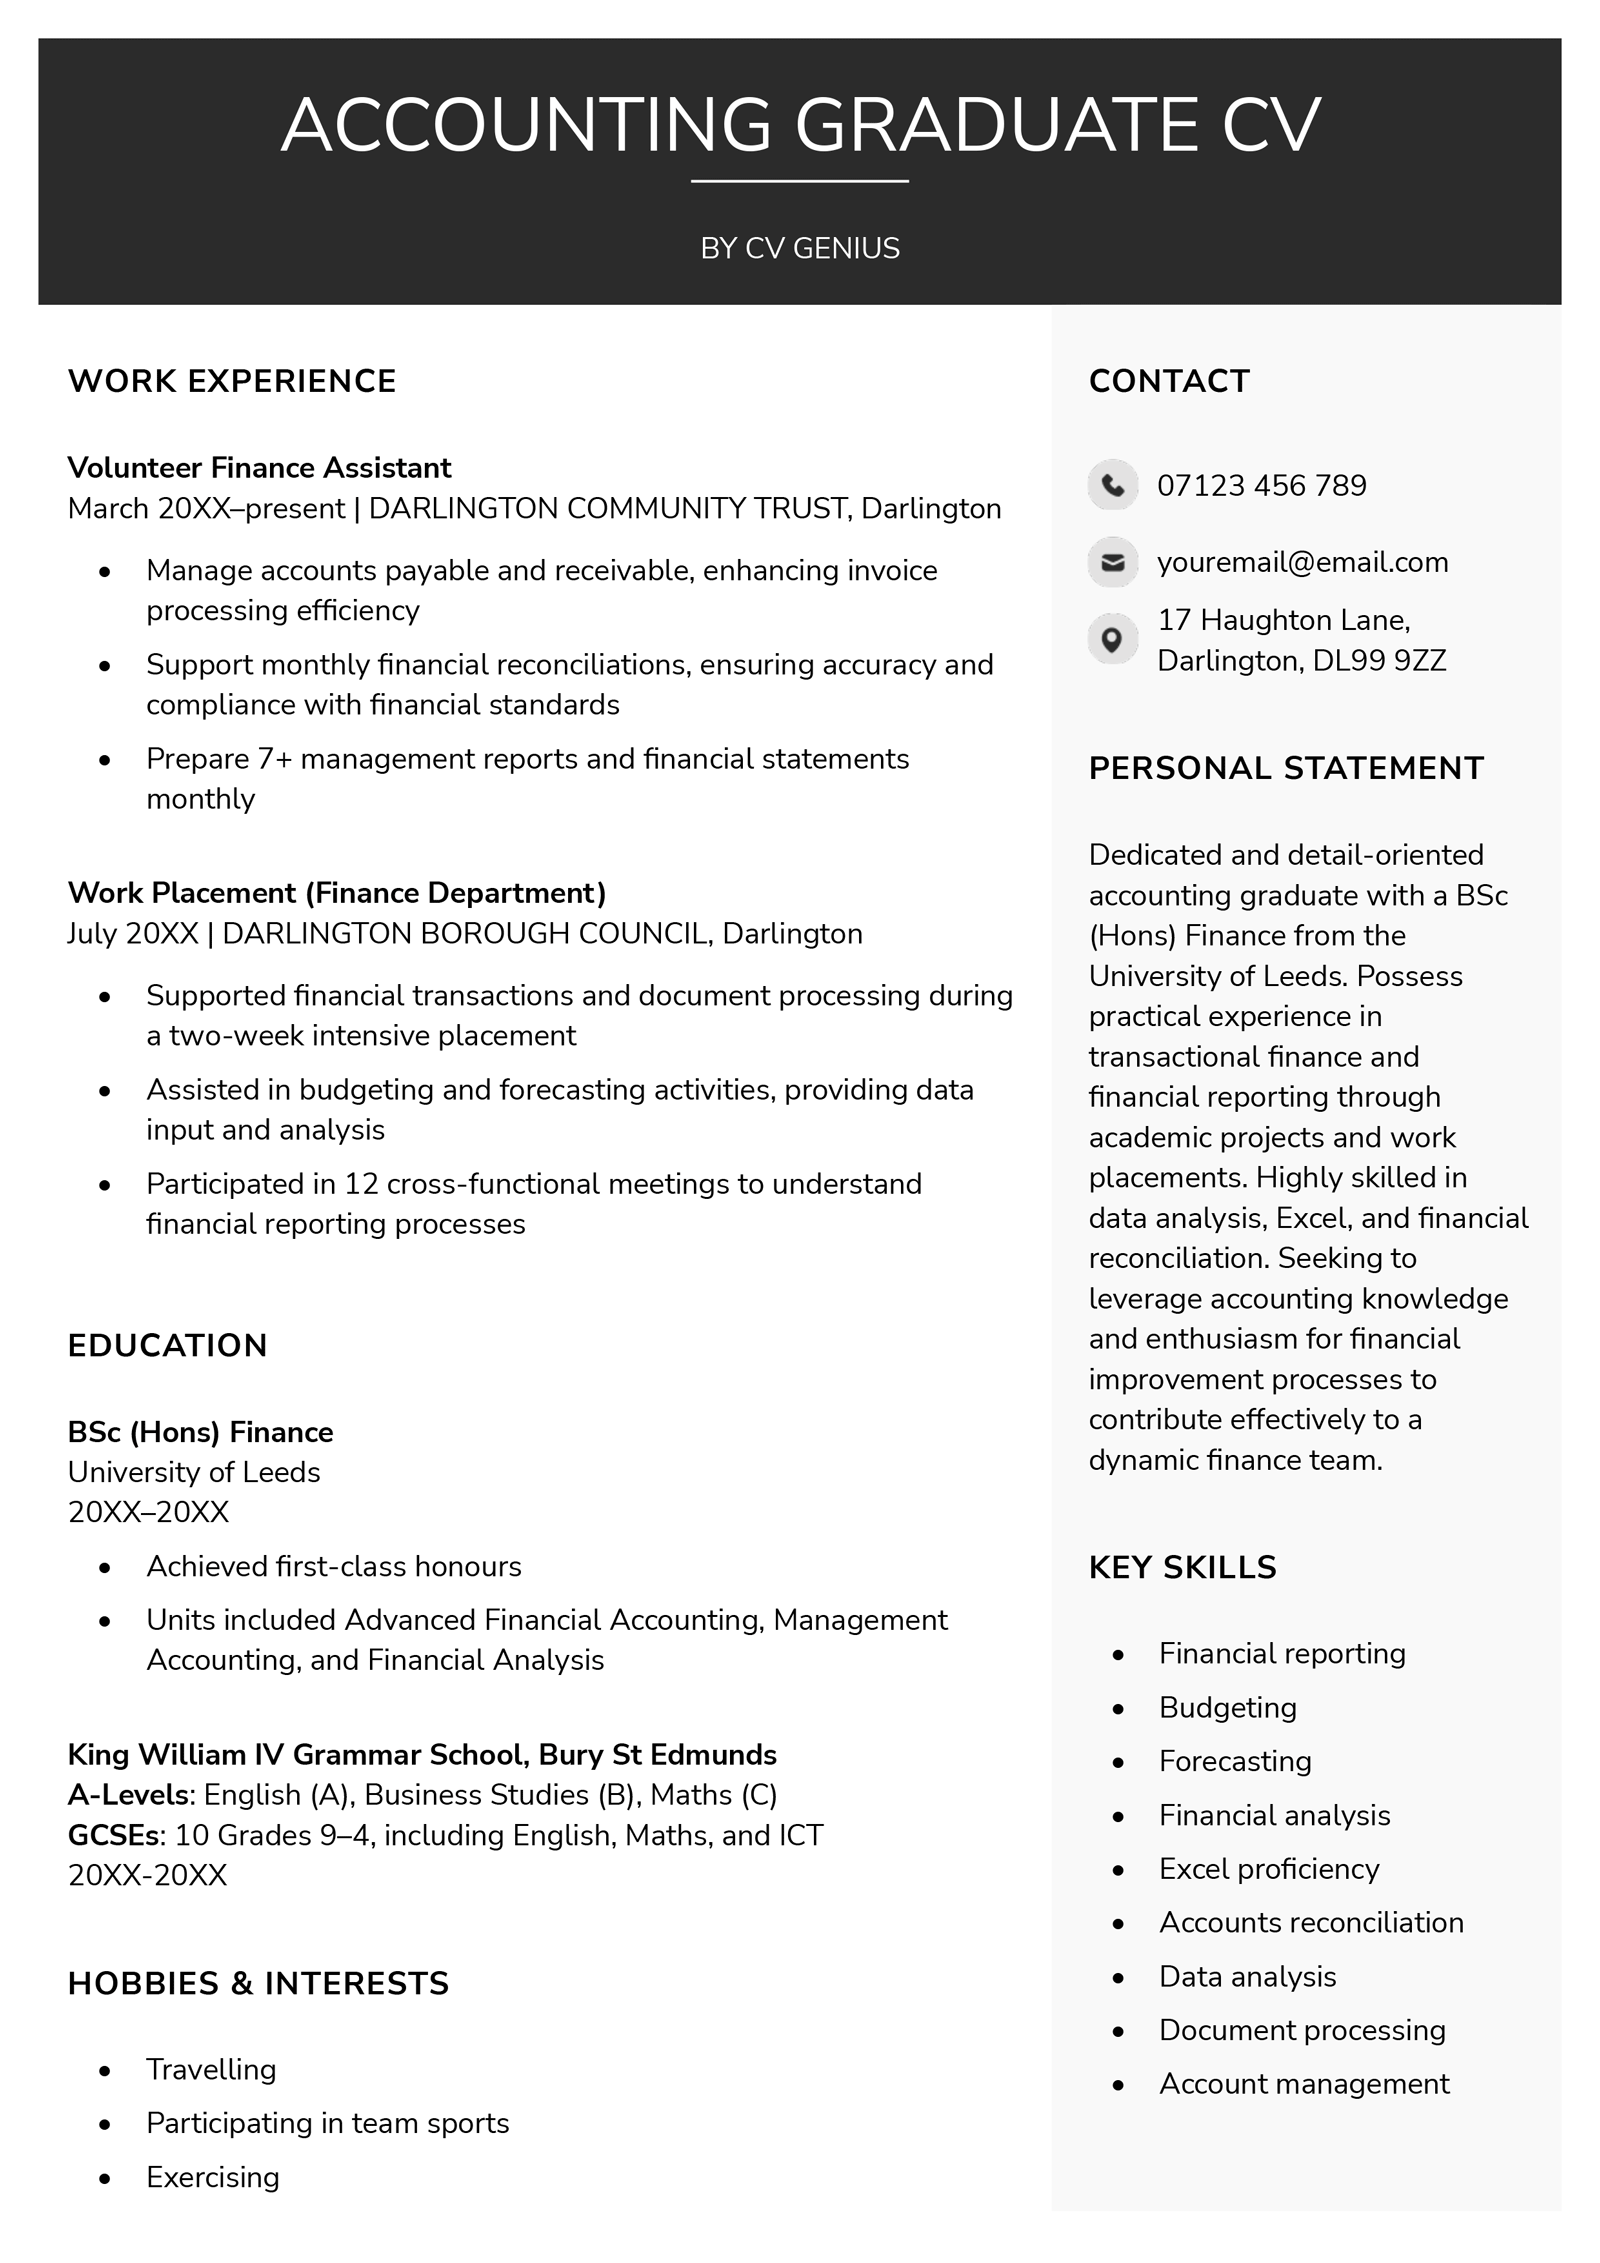 An accounting graduate CV example which opts for a conservative black, grey, and white colour scheme for this traditional industry.